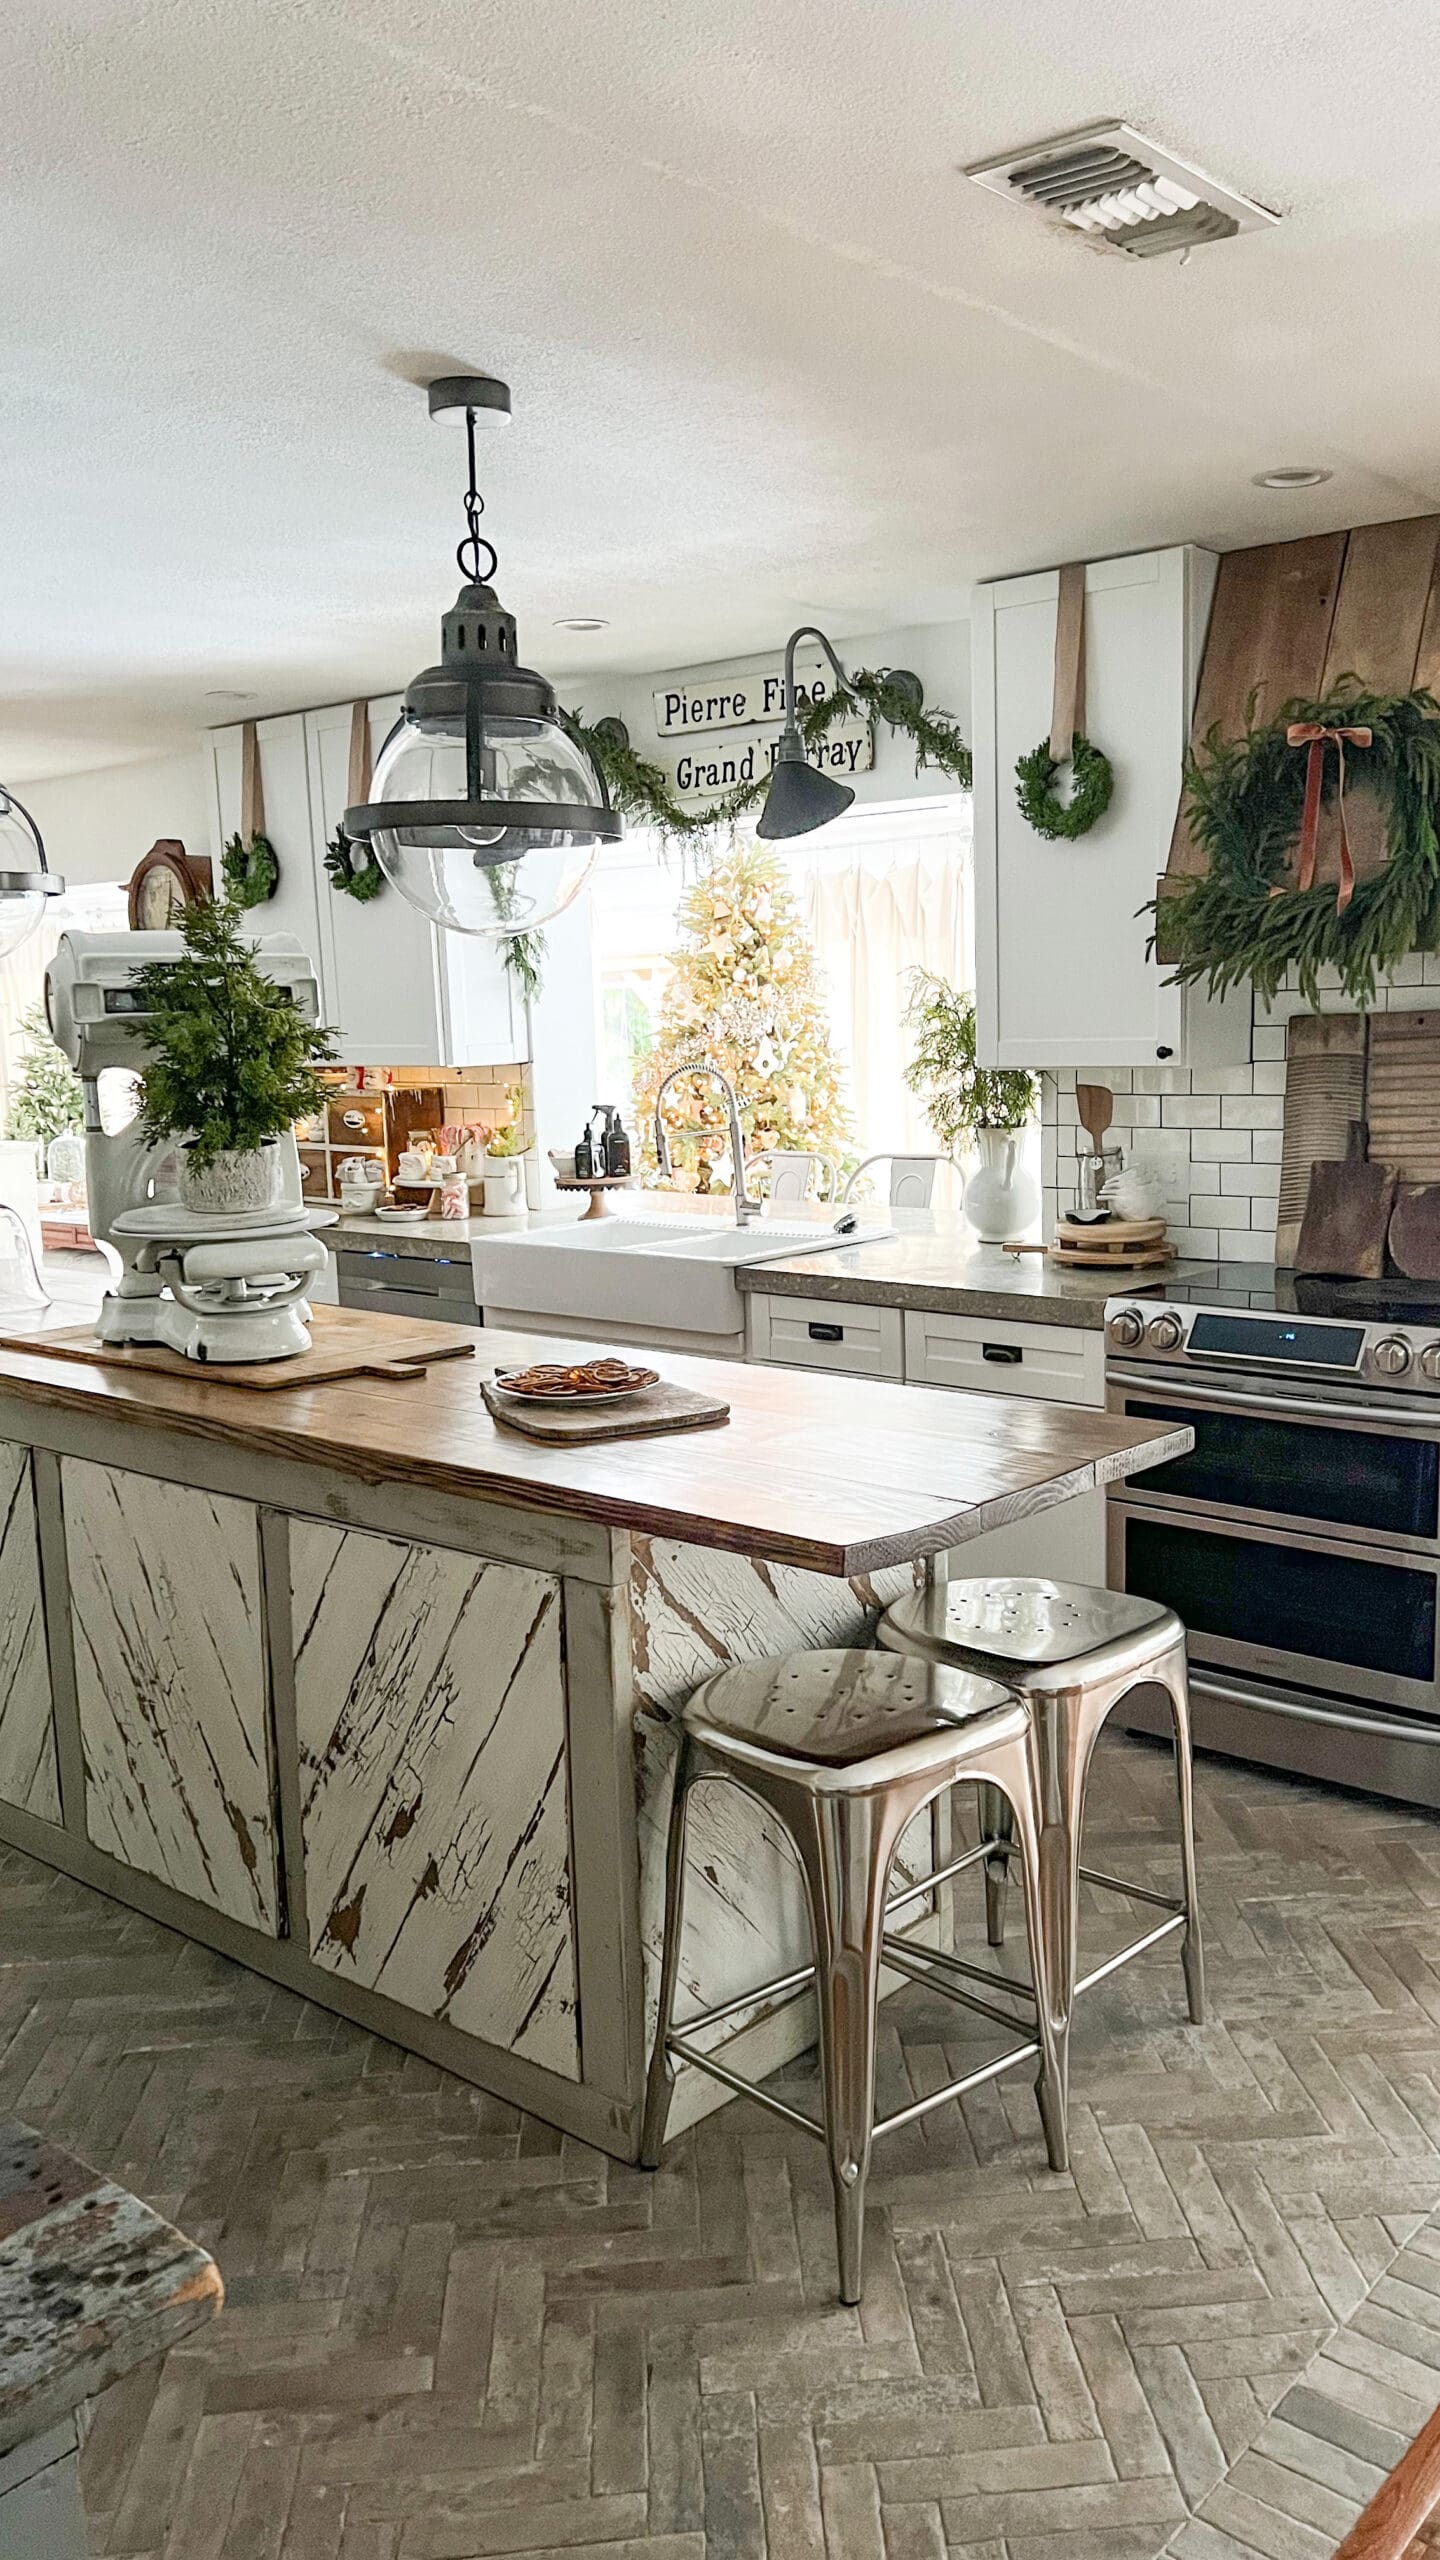 kitchen cabinets with small wreaths and a wooden kitchen hood with a large Christmas wreath